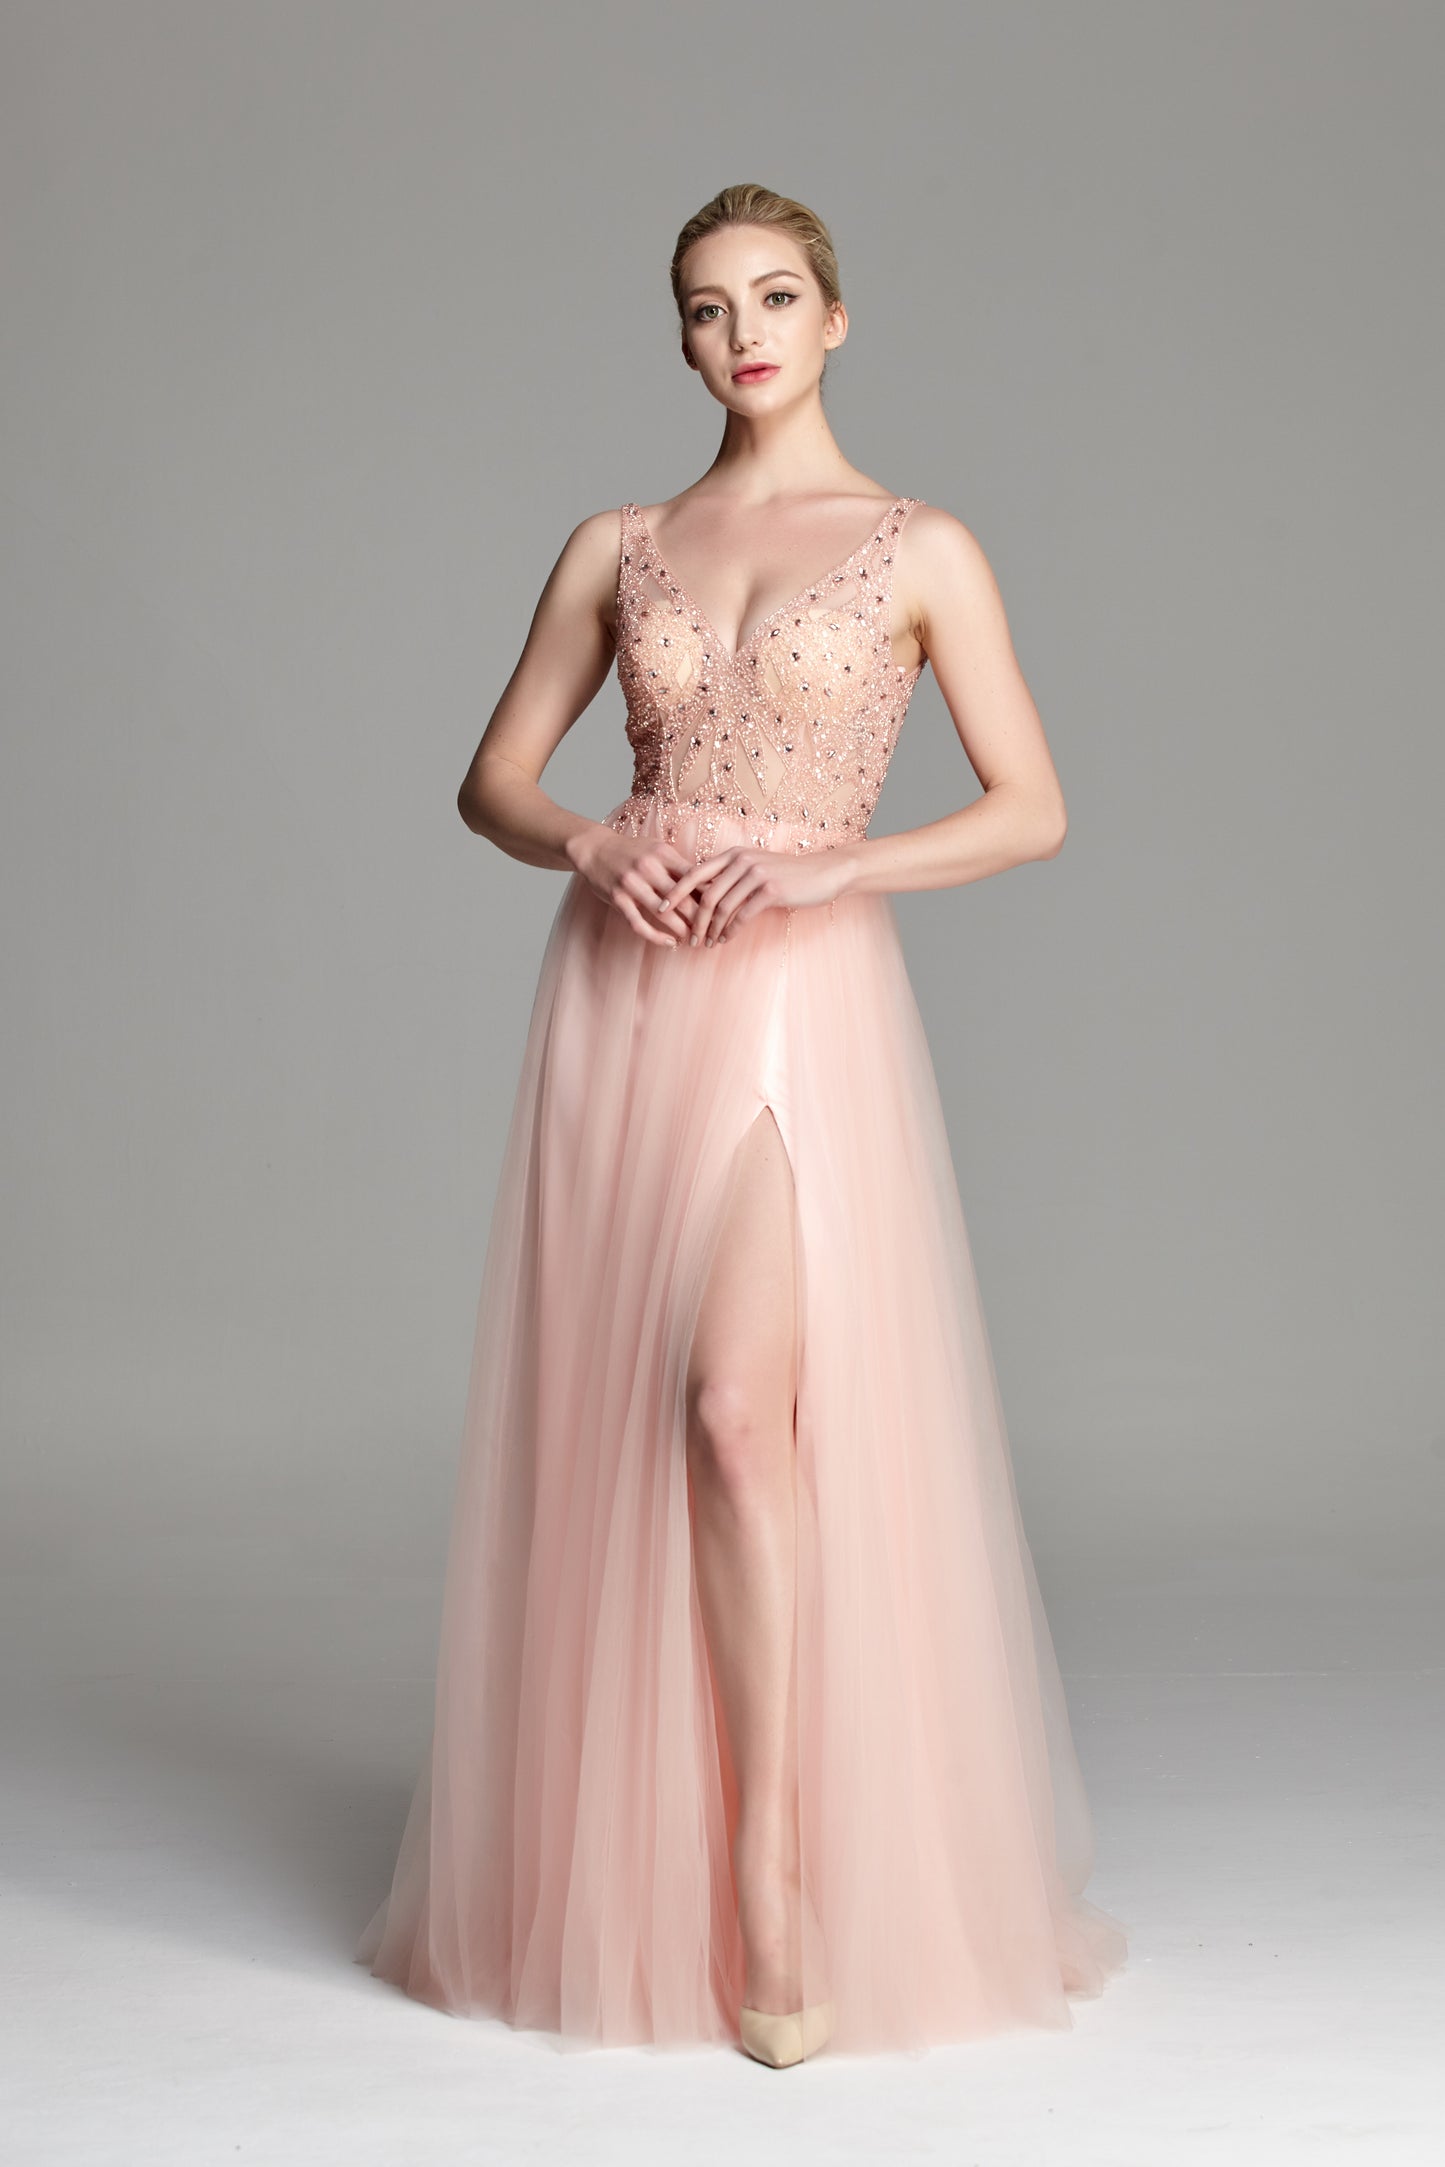 Wholesale Glamorous Delight Lace Prom Gown with Sparkling Tulle Skirt 32547B